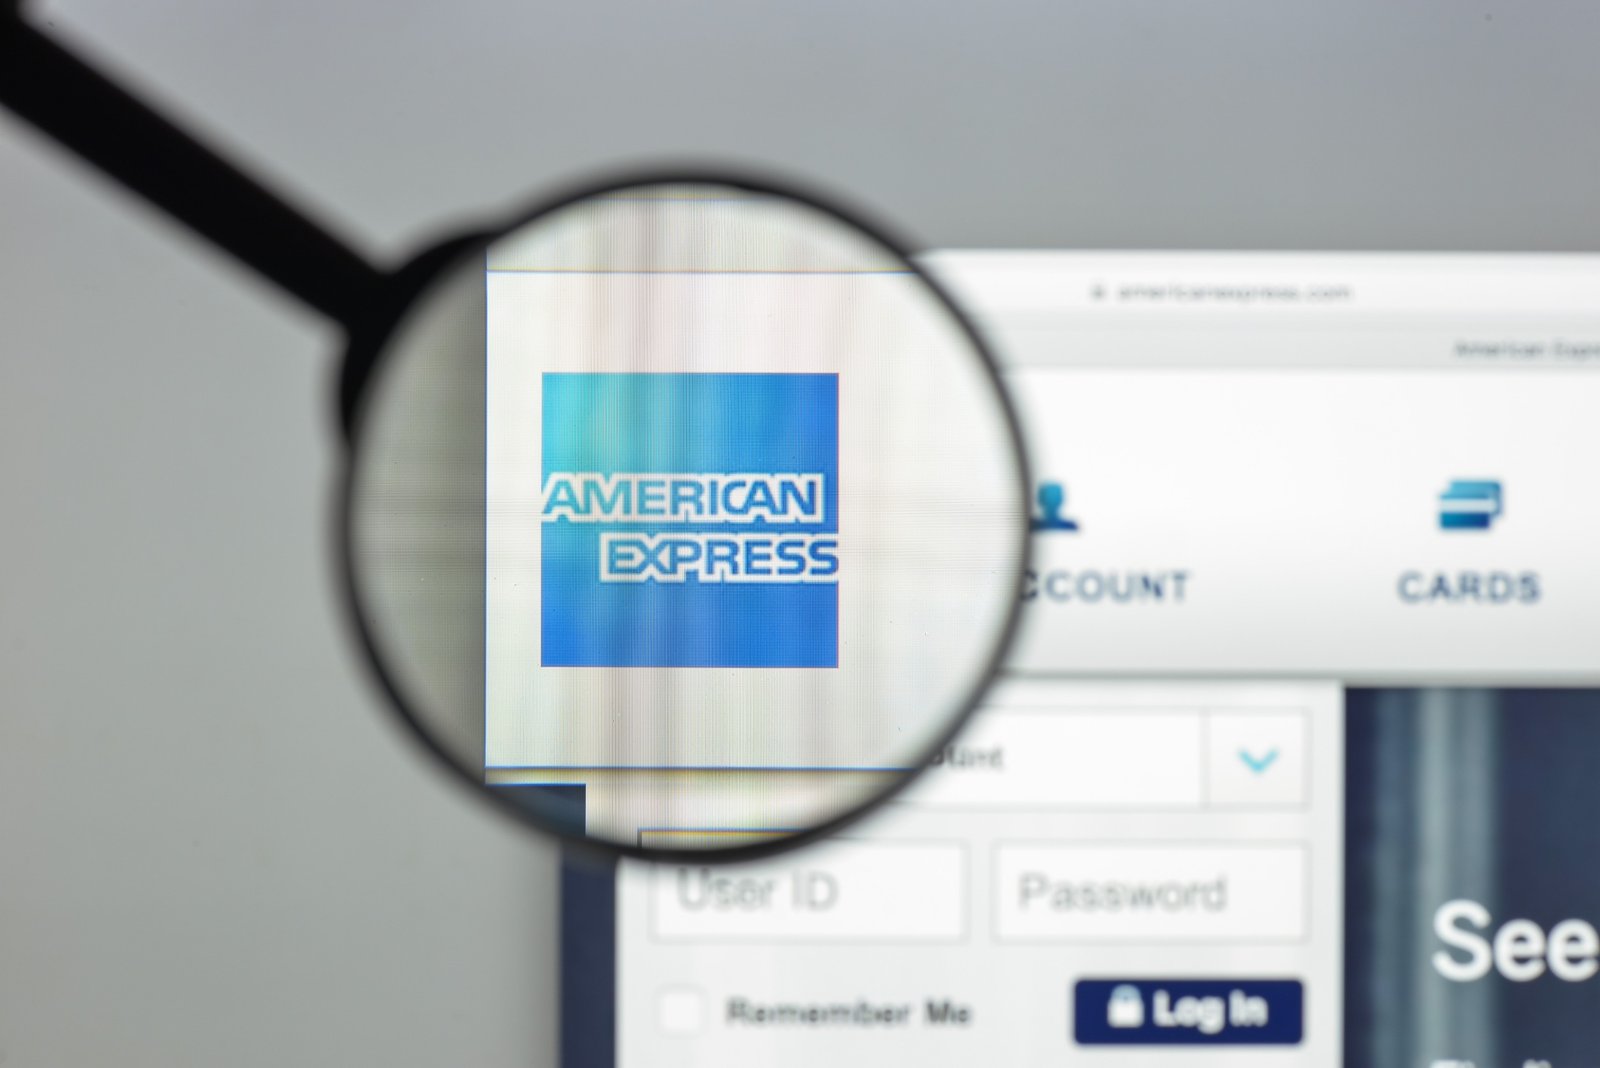 Amex Down 4.4% as Revenue Misses Expectations